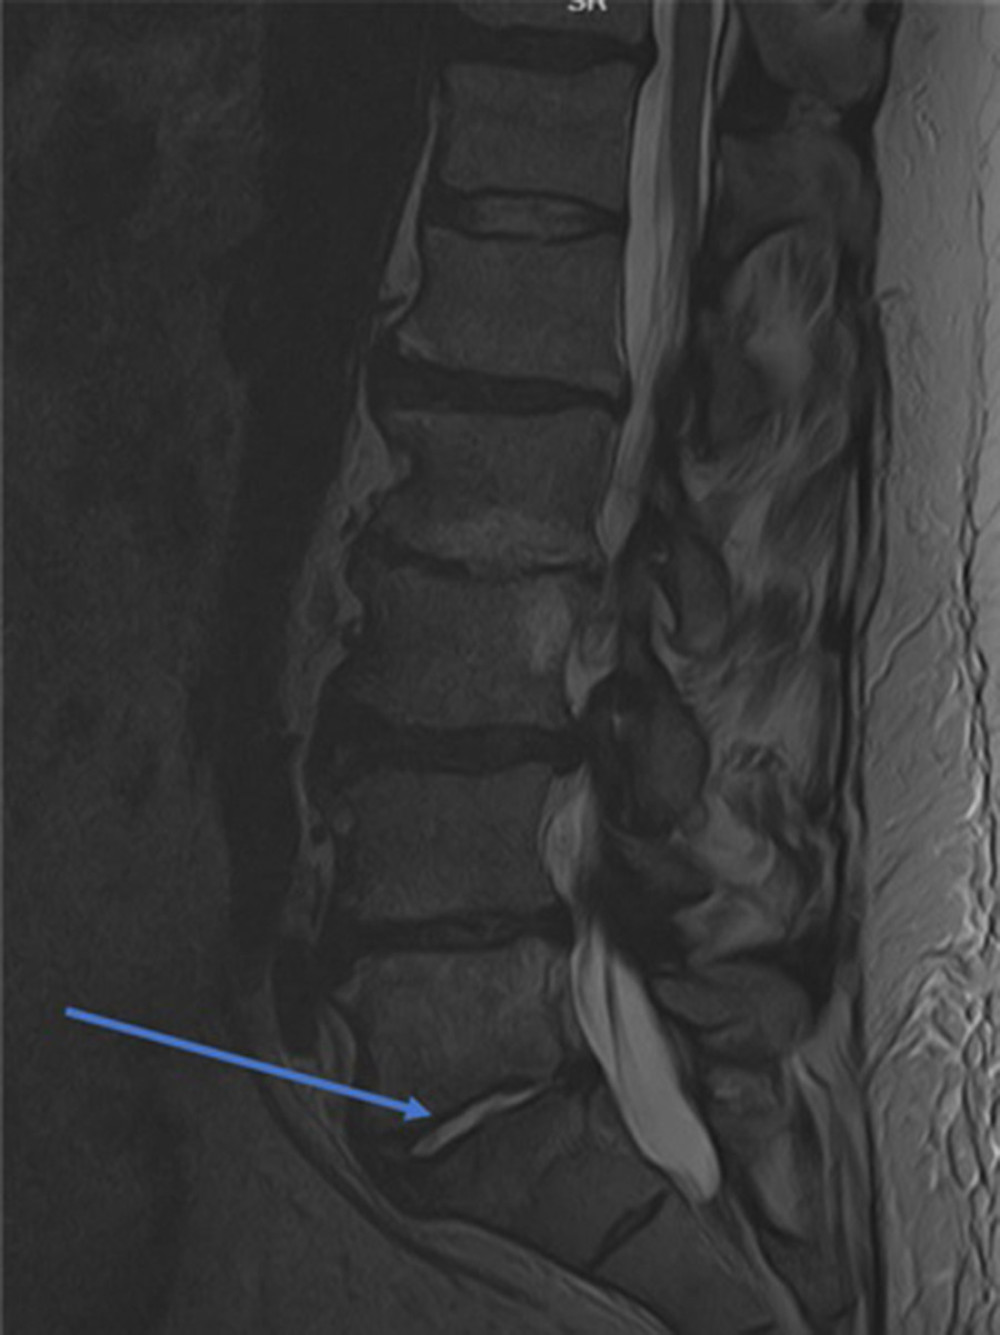 MRI of lower lumbar spine demonstrating abnormal enhancement within the L5–S1 disc, consistent with discitis (blue arrow).